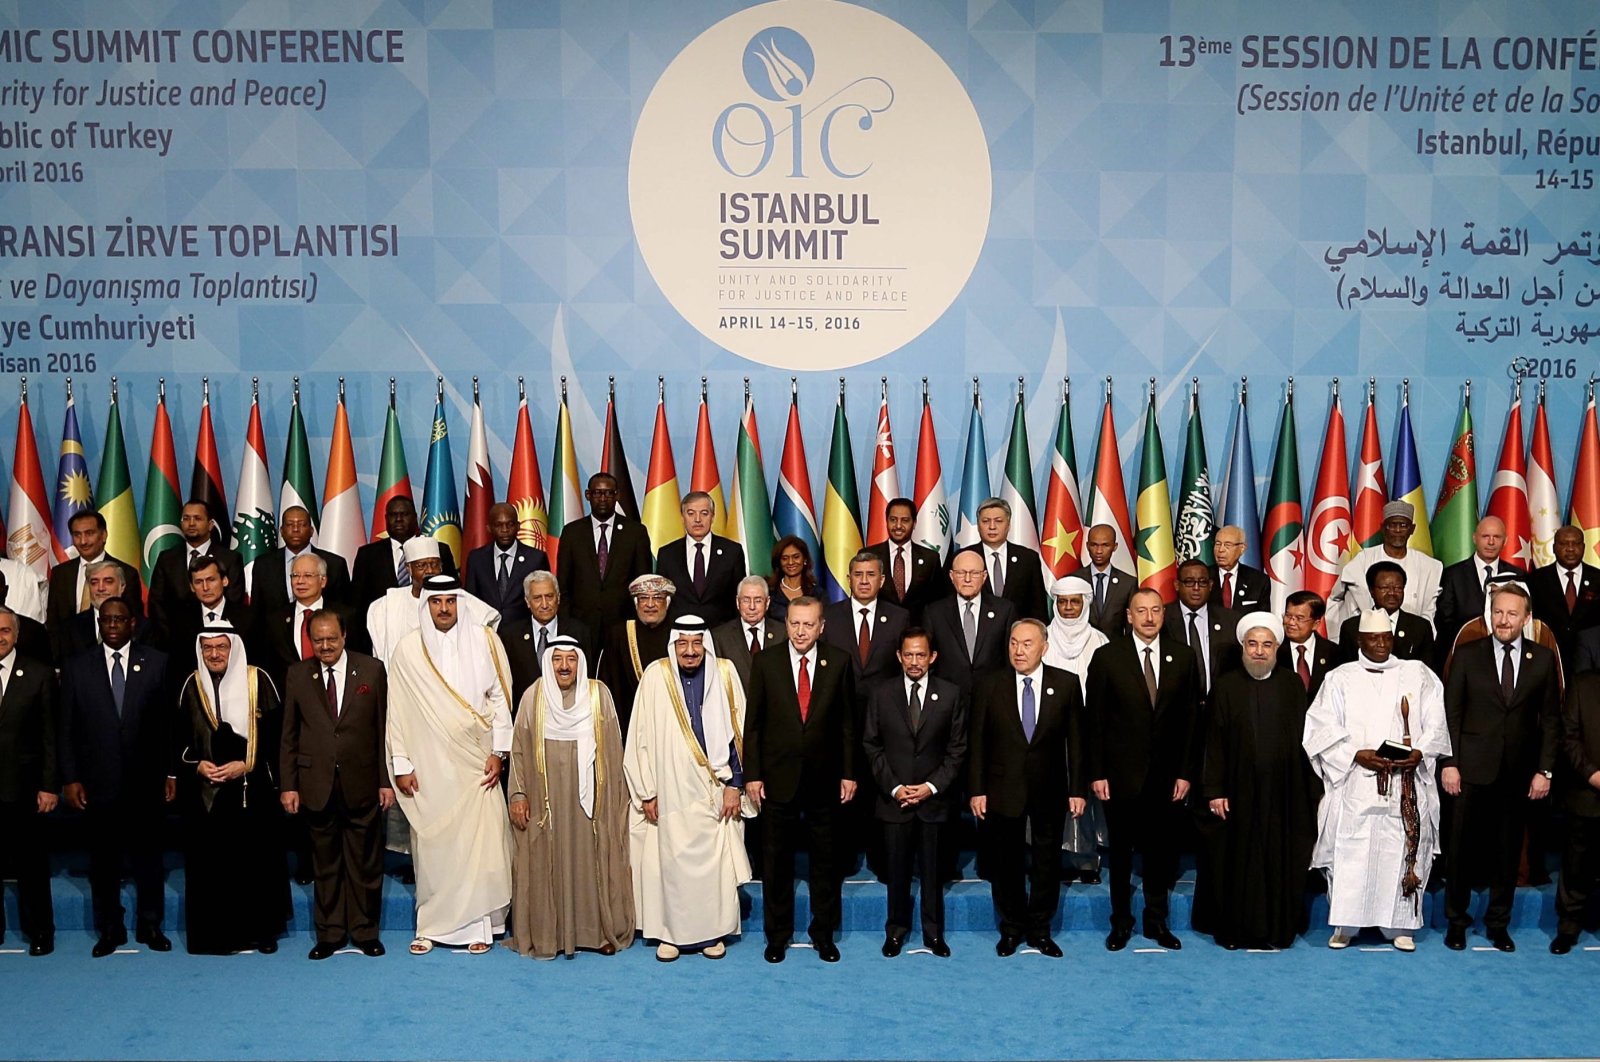 Leaders and representatives of Islamic countries pose for a photo during the opening of the 13th the Organisation of Islamic Cooperation summit in Istanbul, Turkey, April 13, 2016. (AP Photo)